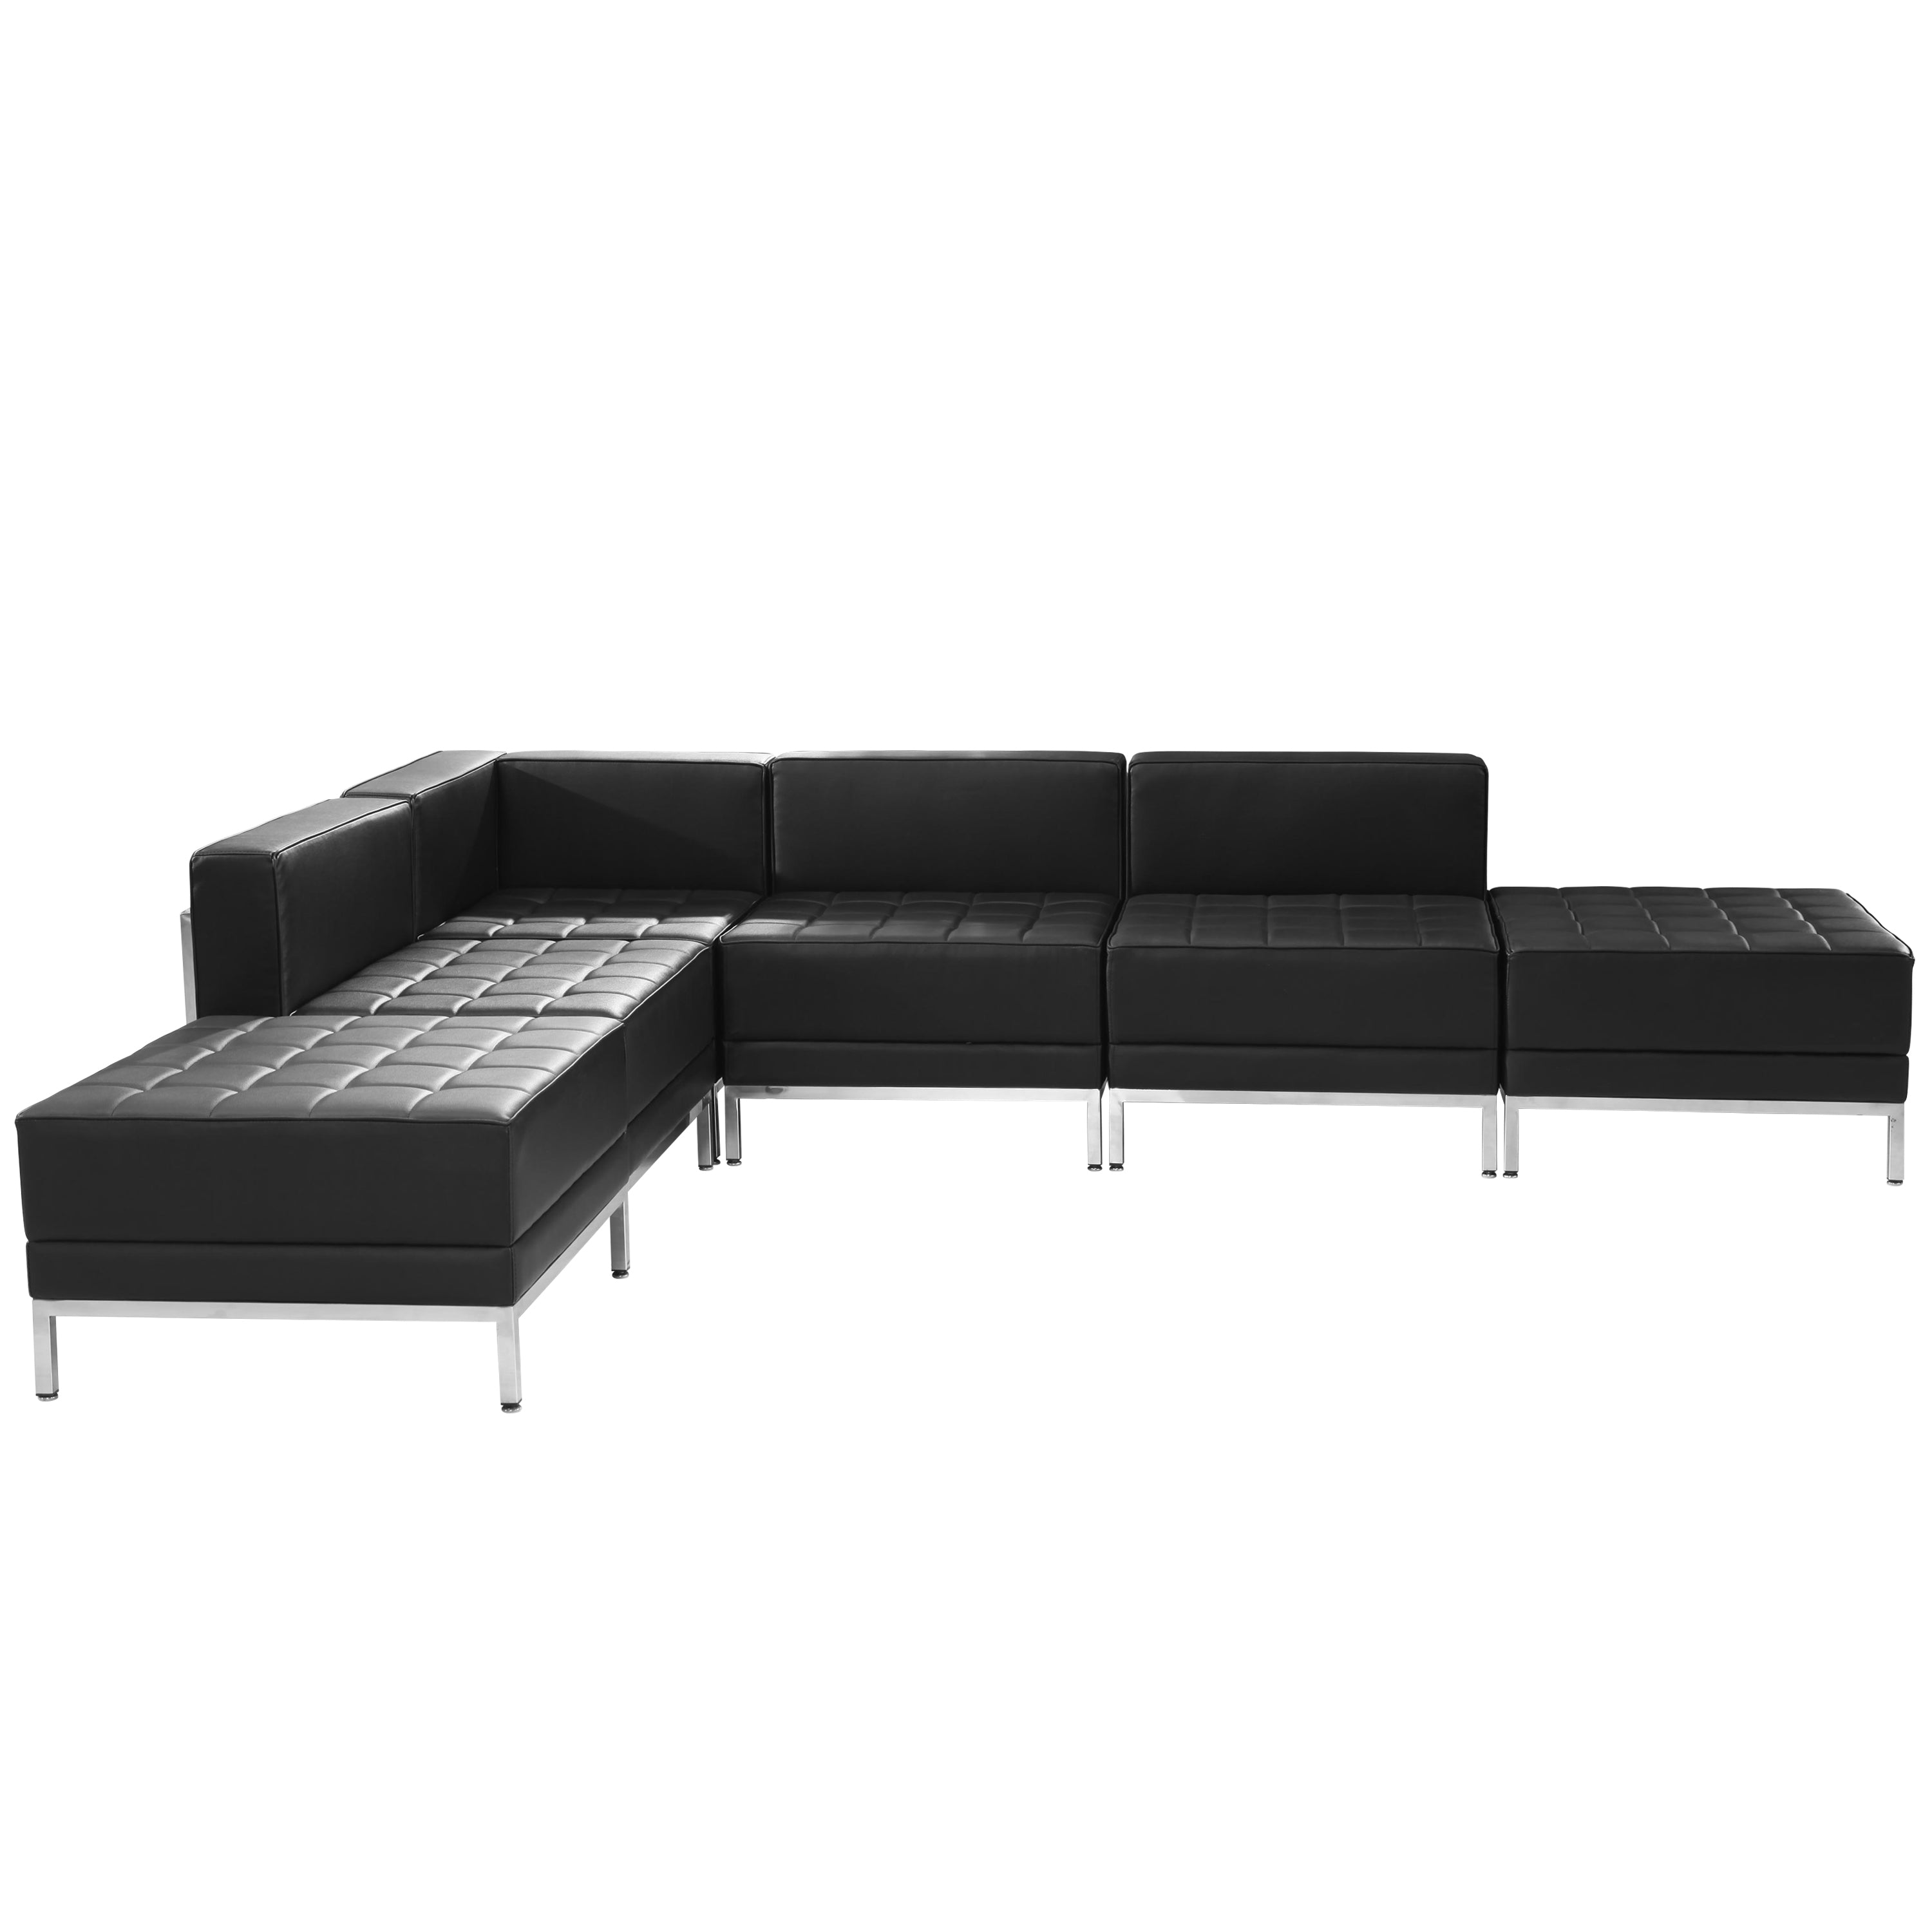 HERCULES Imagination Series LeatherSoft Sectional Configuration, 6 Pieces-Modular Reception Set-Flash Furniture-Wall2Wall Furnishings